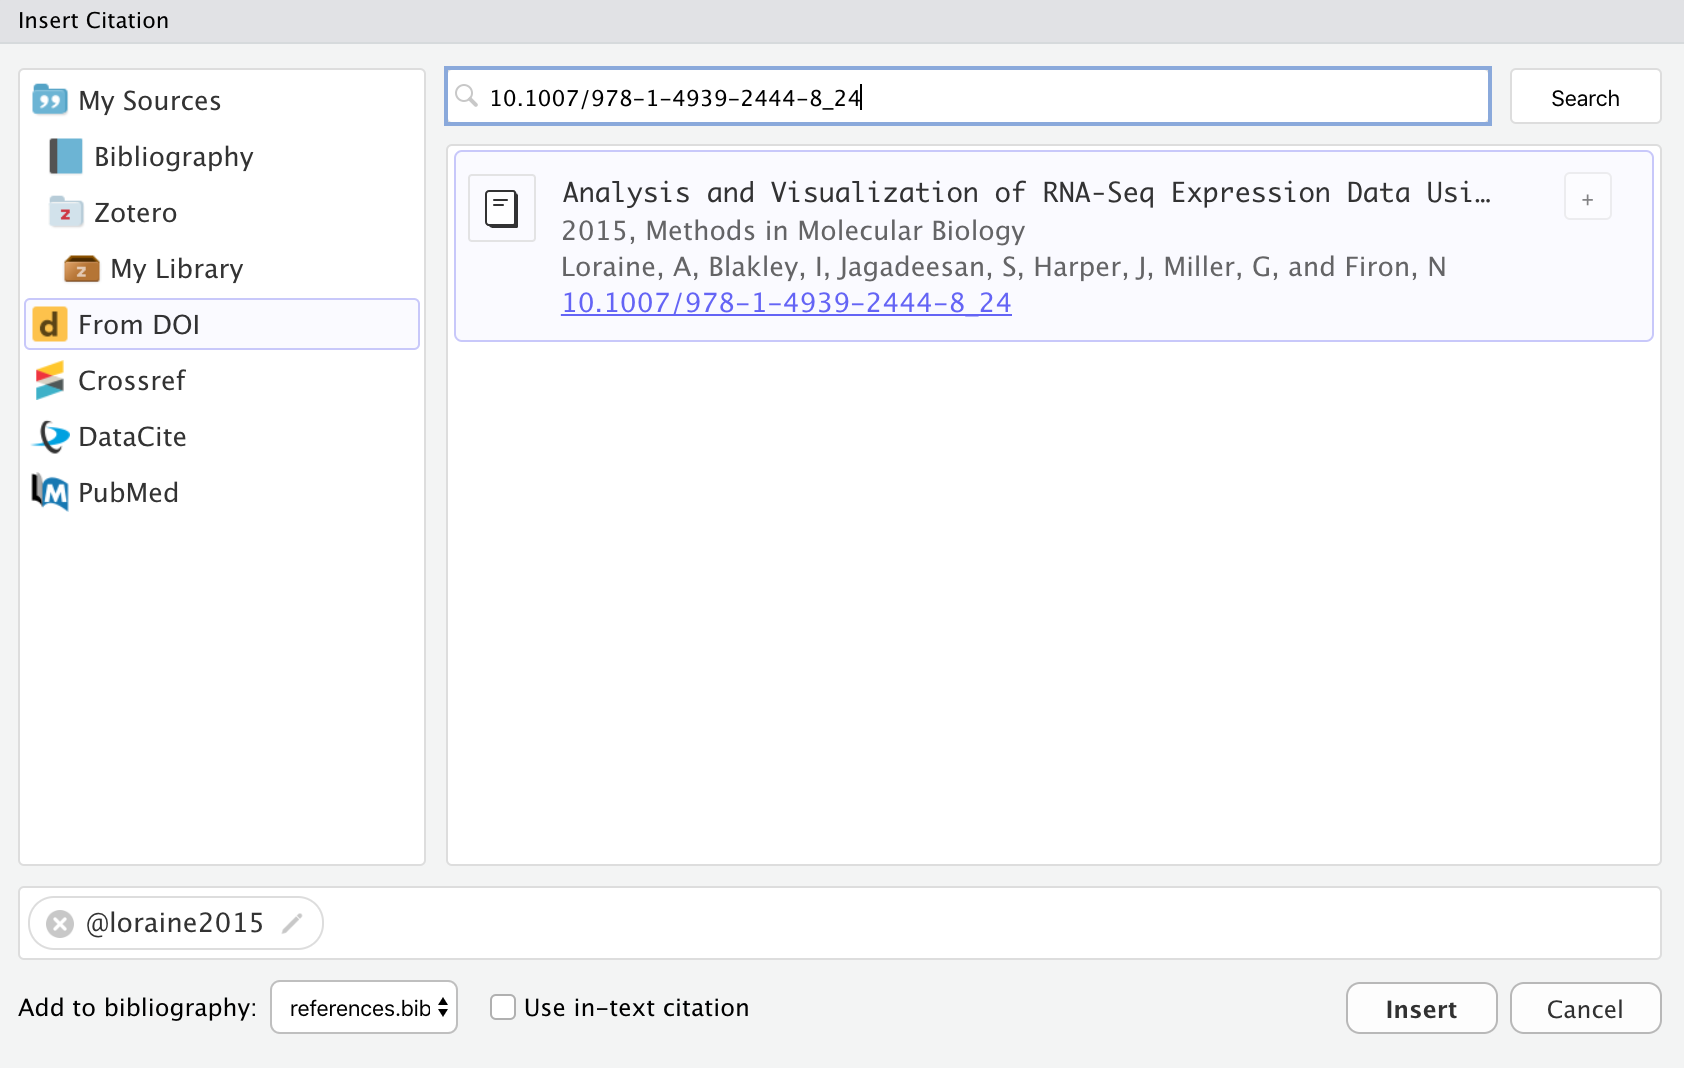 The 'Insert Citation' window in RStudio. The 'From DOI' option is selected in the left hand section. There is a DOI in the search bar that runs along the top of the section on the right, and the document corresponding to that DOI appears in the search results underneath. The search result has the title of the paper in black, the year published and journal in gray underneath that, the authors in gray underneath that, and the hyperlinked DOI underneath that. To the left of the title is a journal paper icon.